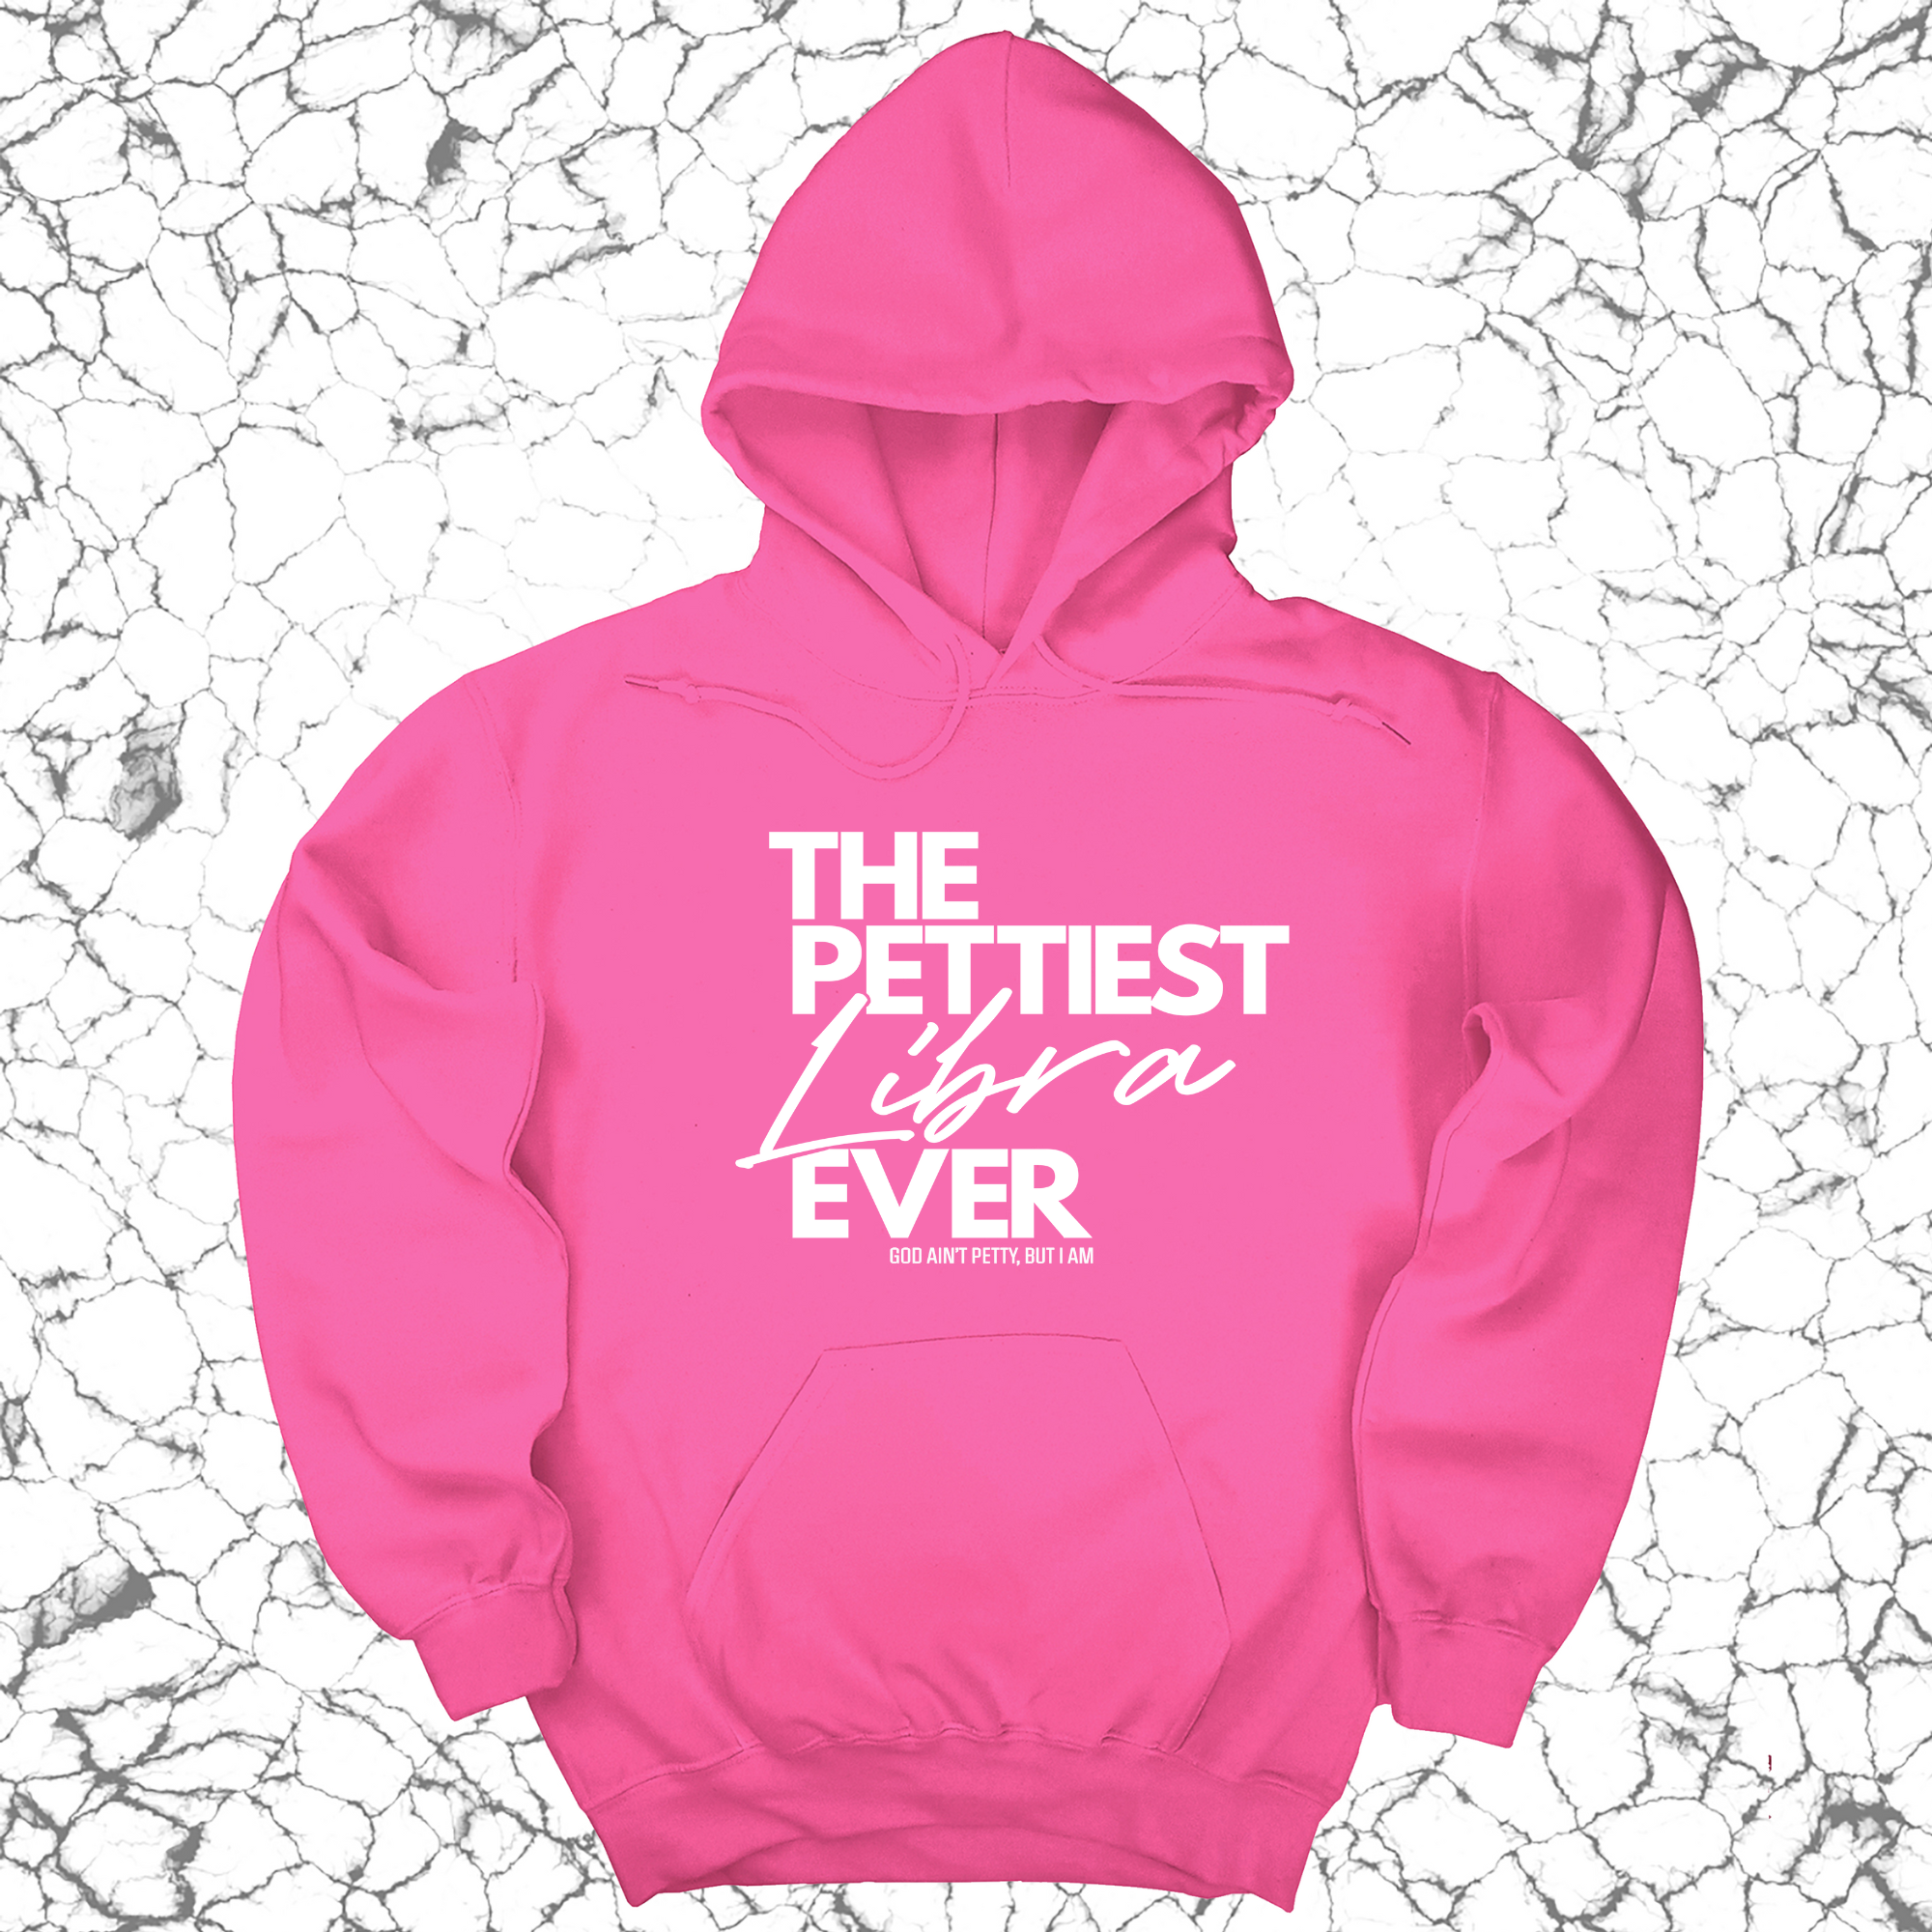 The Pettiest Libra Ever Unisex Hoodie-Hoodie-The Original God Ain't Petty But I Am